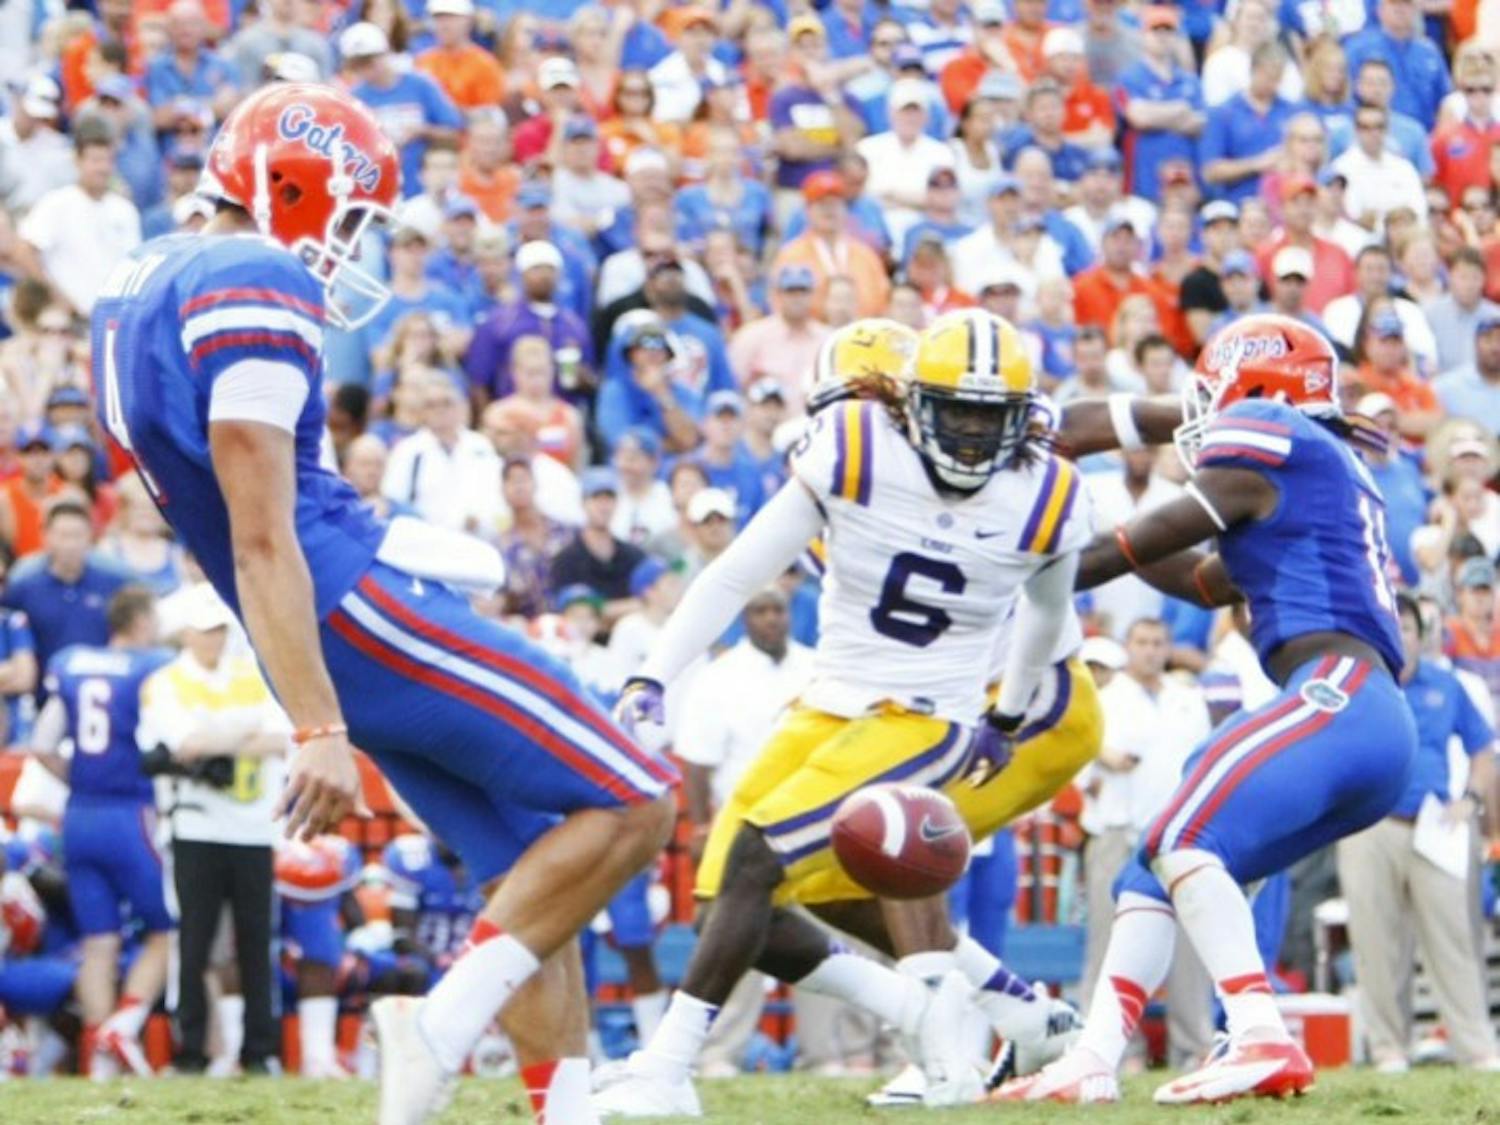 Sophomore Kyle Christy (4) punts in Florida's 14-6 victory against LSU on Saturday in Ben Hill Griffin Stadium. Christy helped UF win the field position battle by pinning LSU inside their 10-yard line three times.